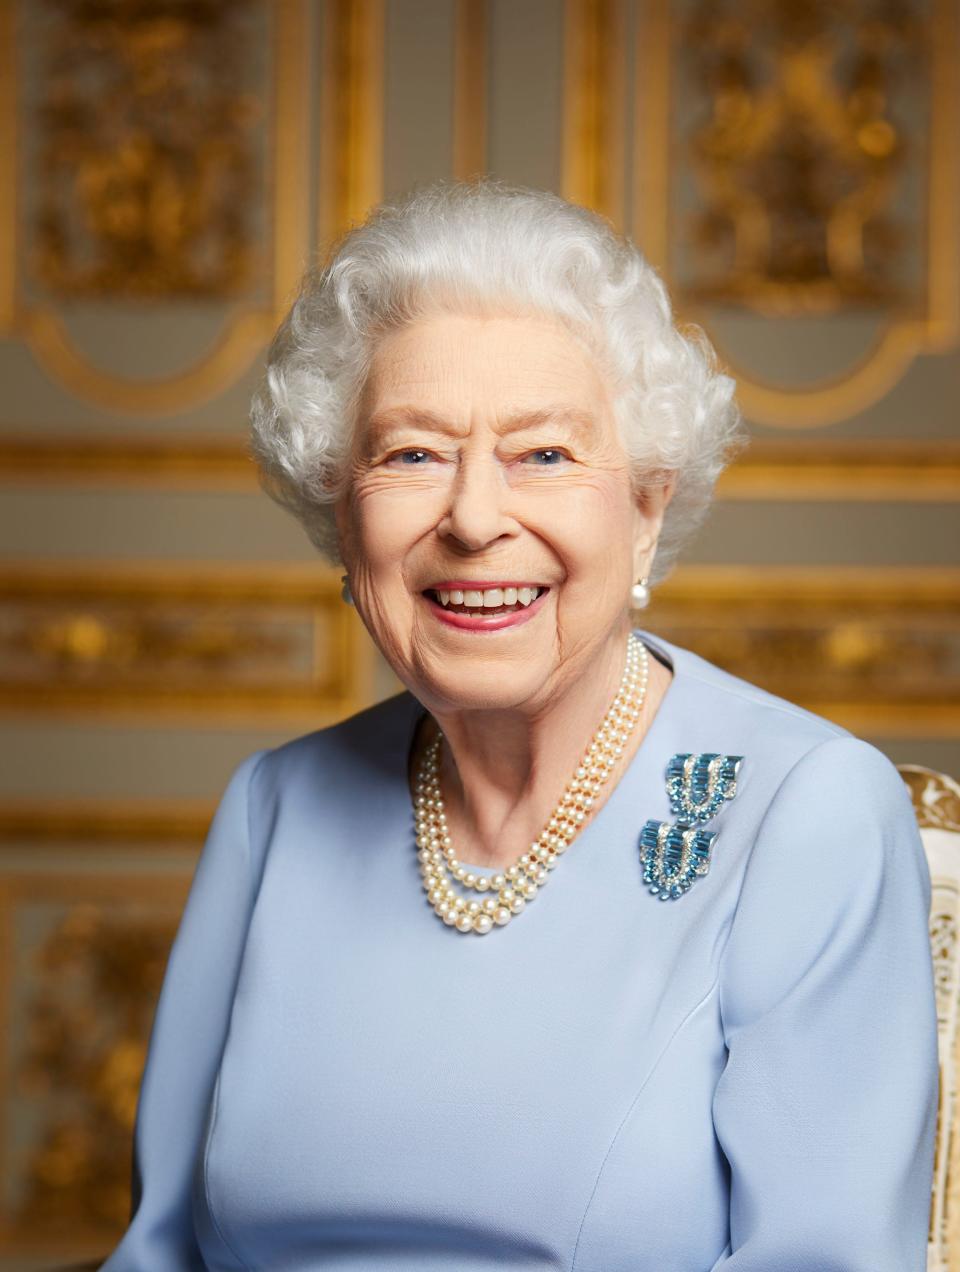 Ahead of the funeral of Queen Elizabeth II, Buckingham Palace issued a new photo Sunday of the British monarch, taken at Windsor Castle in May 2022.